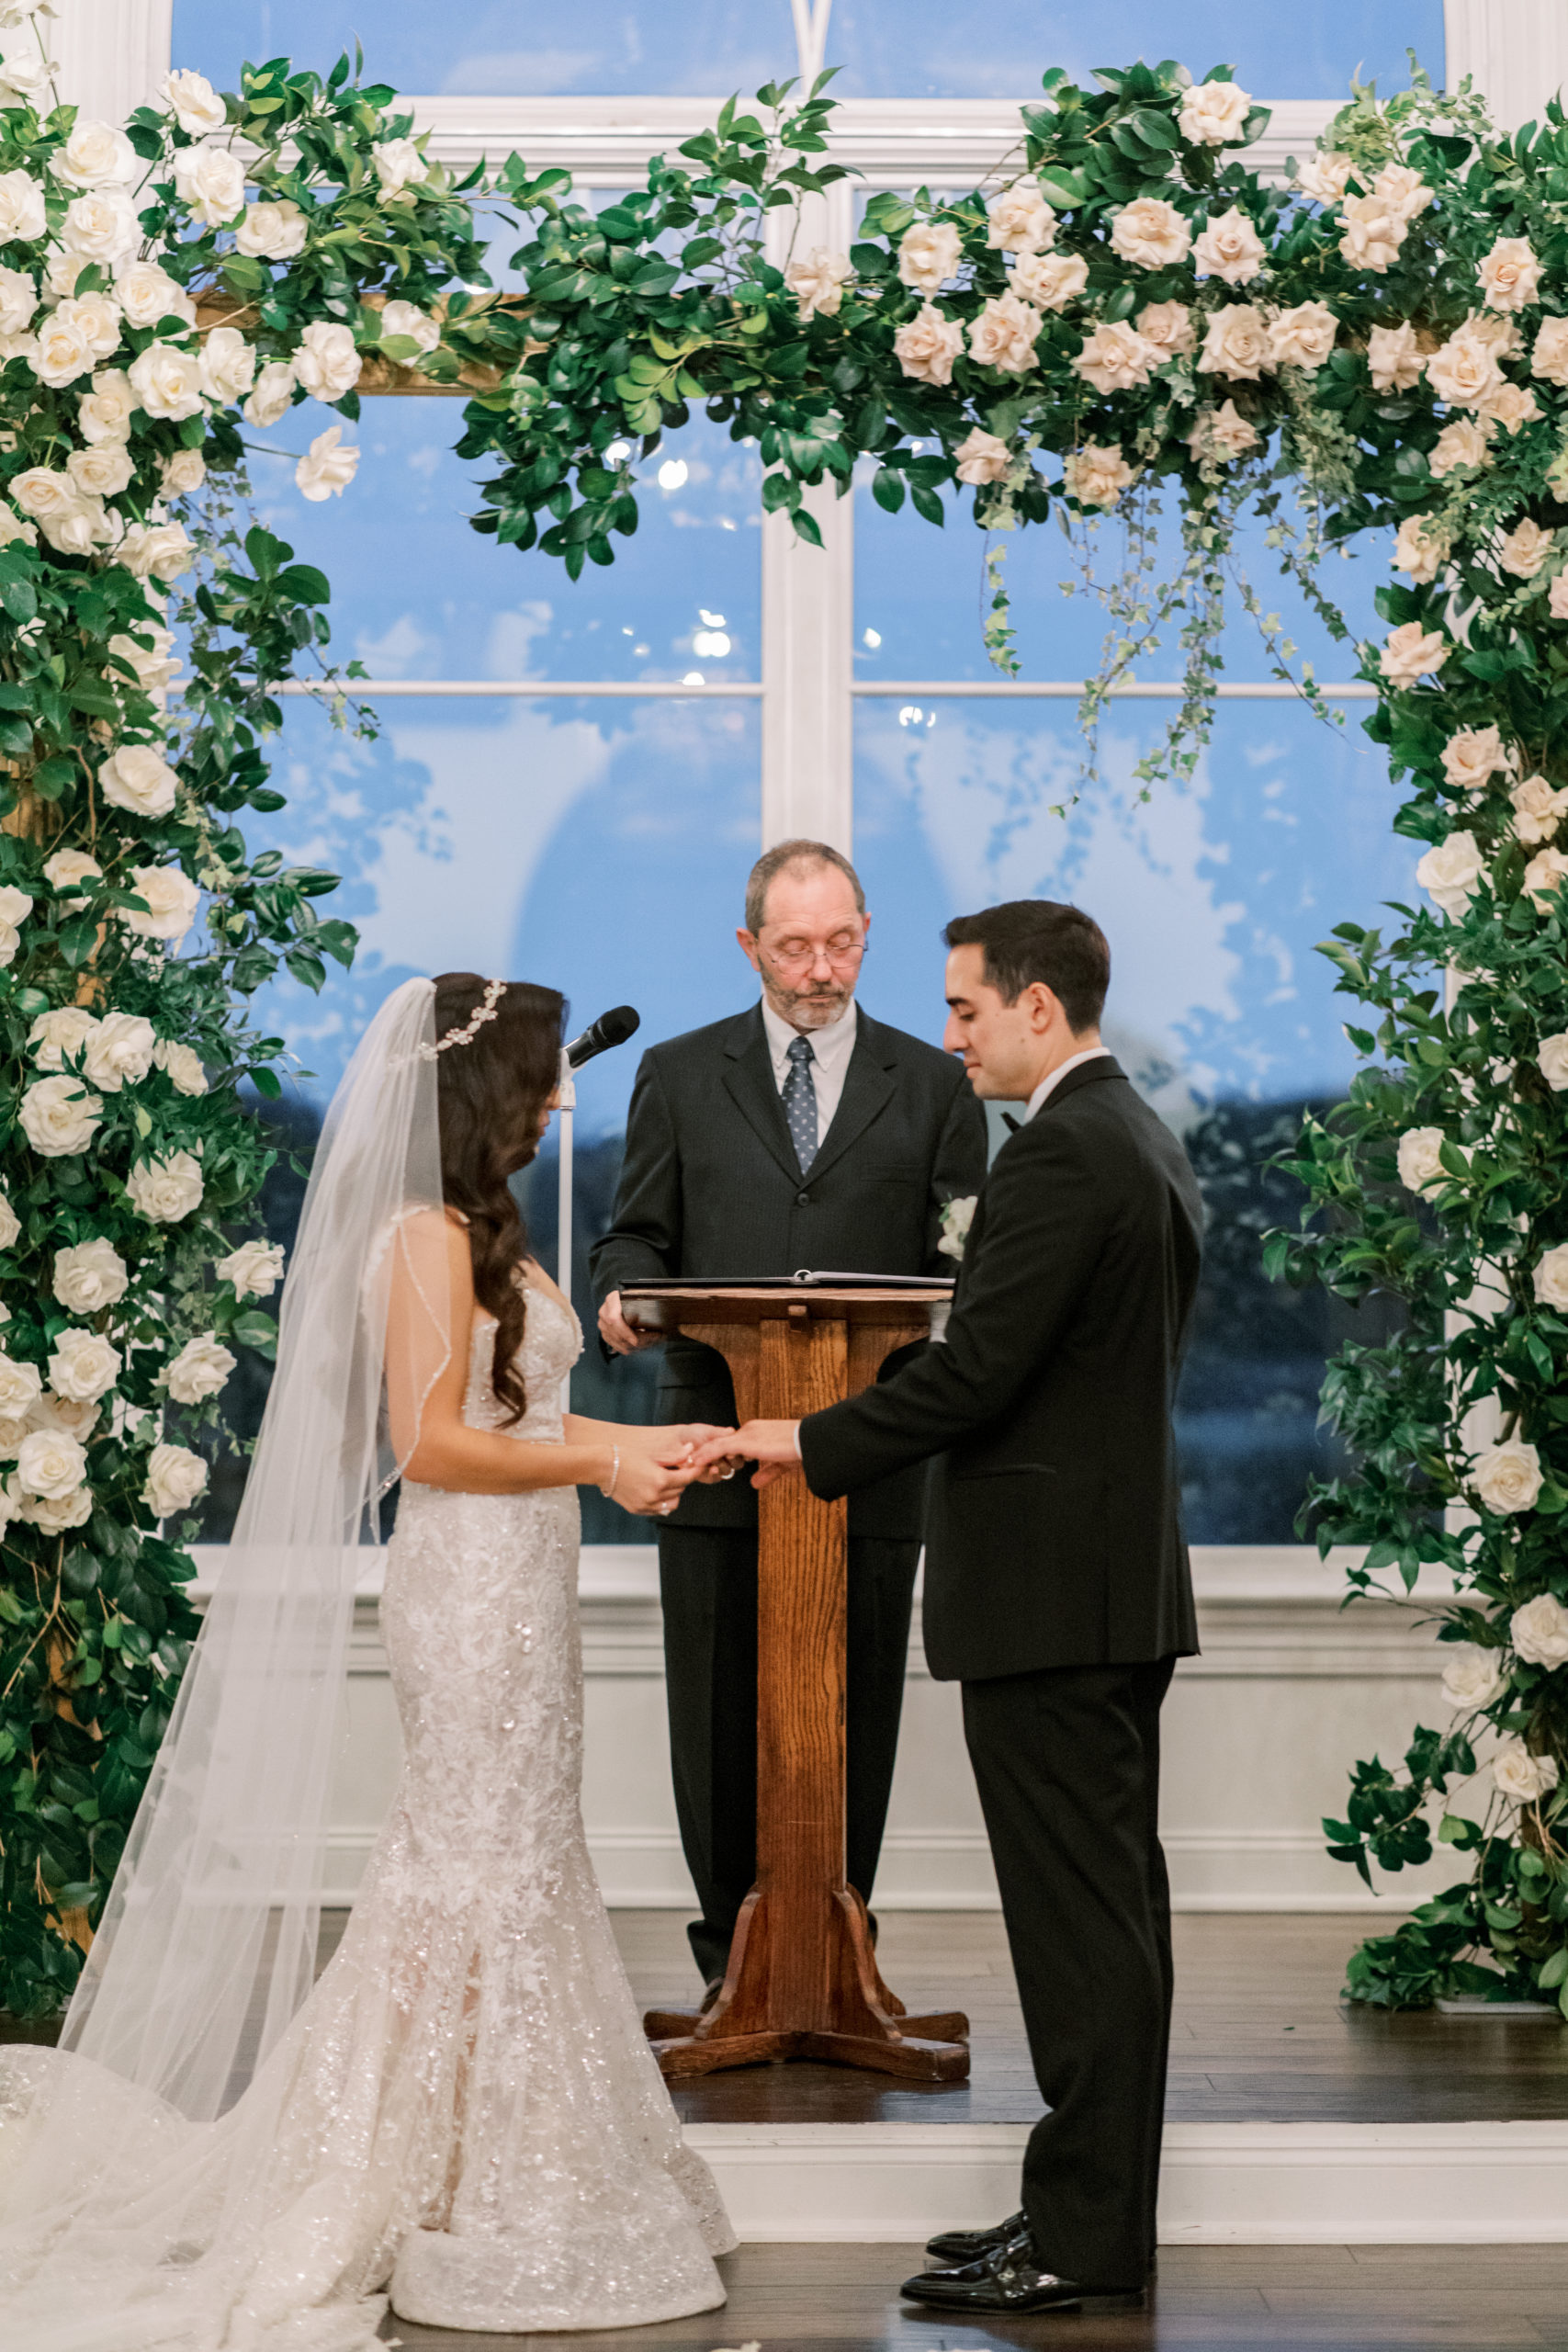 bride and groom exchange rings during wedding ceremony under rose filled square floral arch